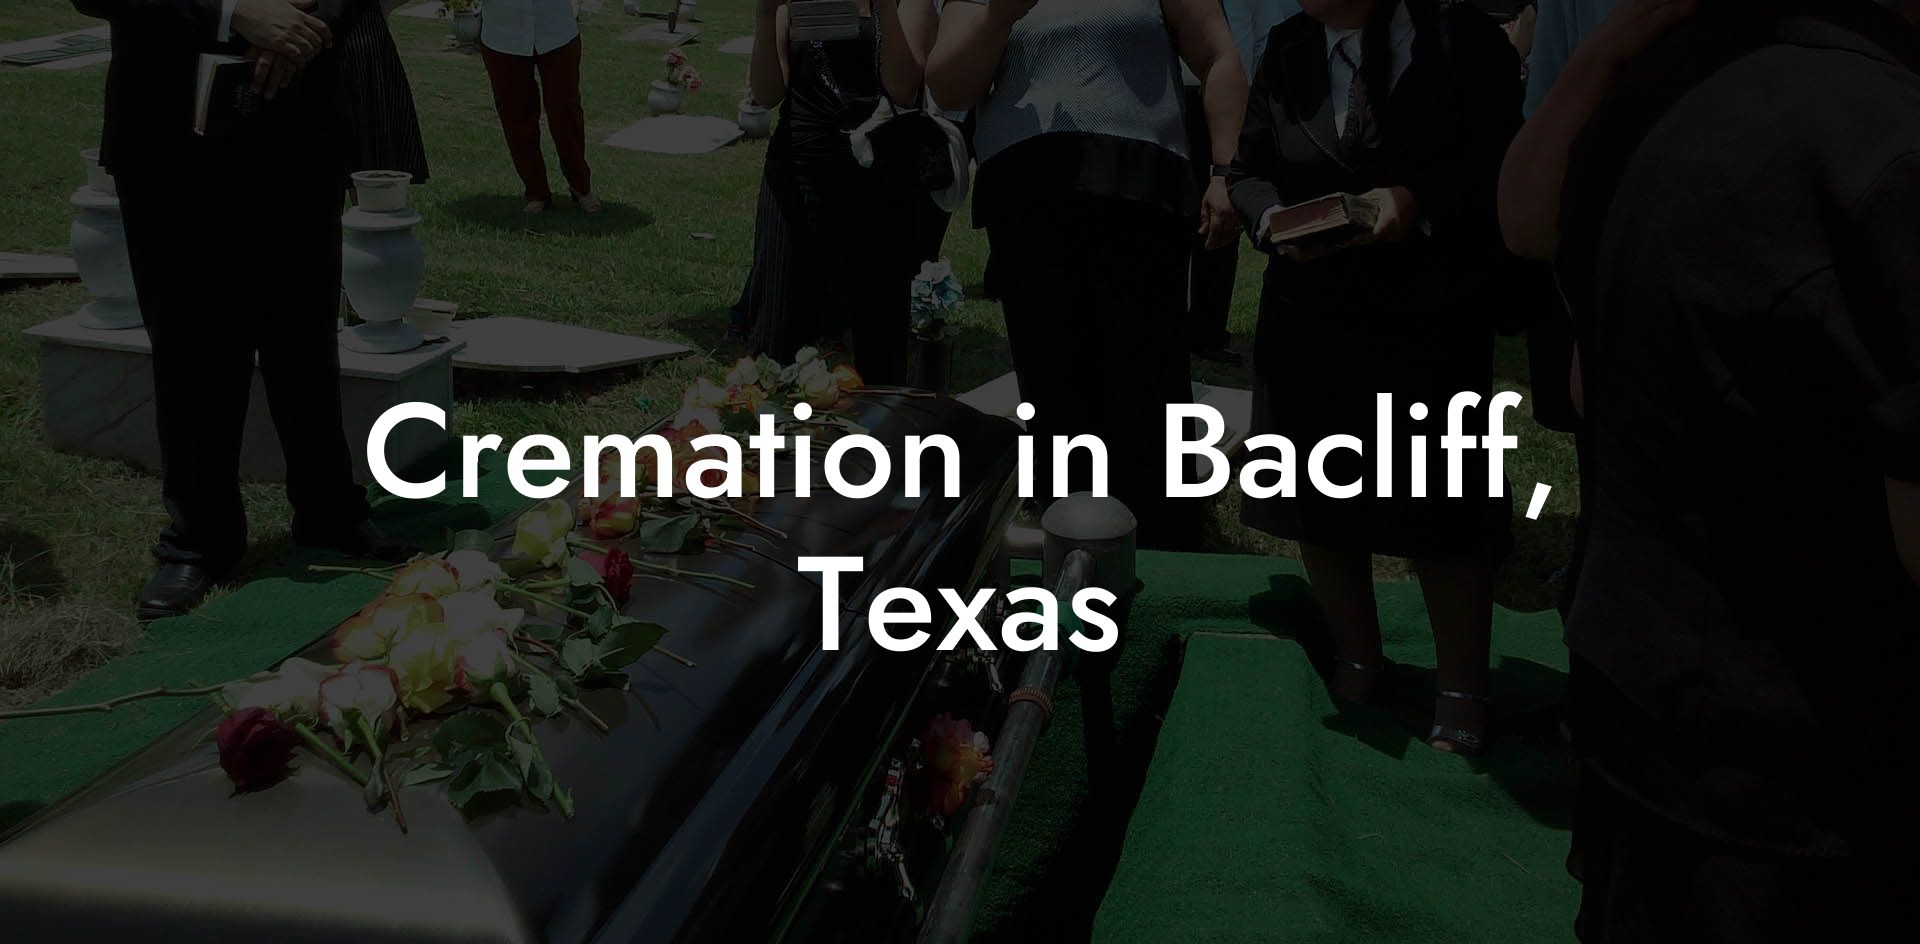 Cremation in Bacliff, Texas